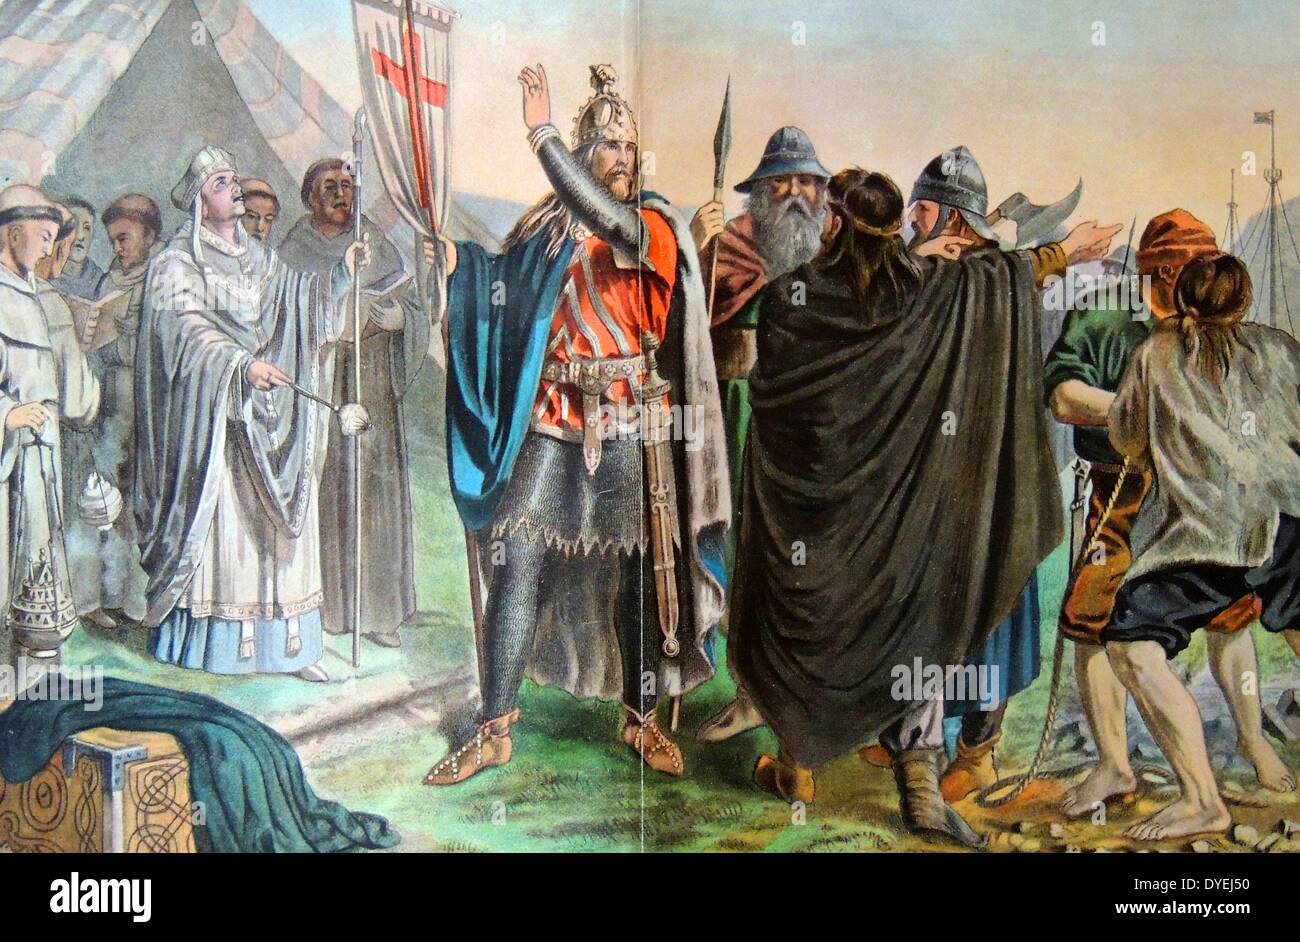 Olaf Tryggvason (960s – 1000) was King of Norway from 995 to 1000. He was the great-grandson of Harald Fairhair, first King of Norway. Olaf played an important part in the often forcible conversion of the Norse to Christianity. he became King of Norway in 995 Stock Photo